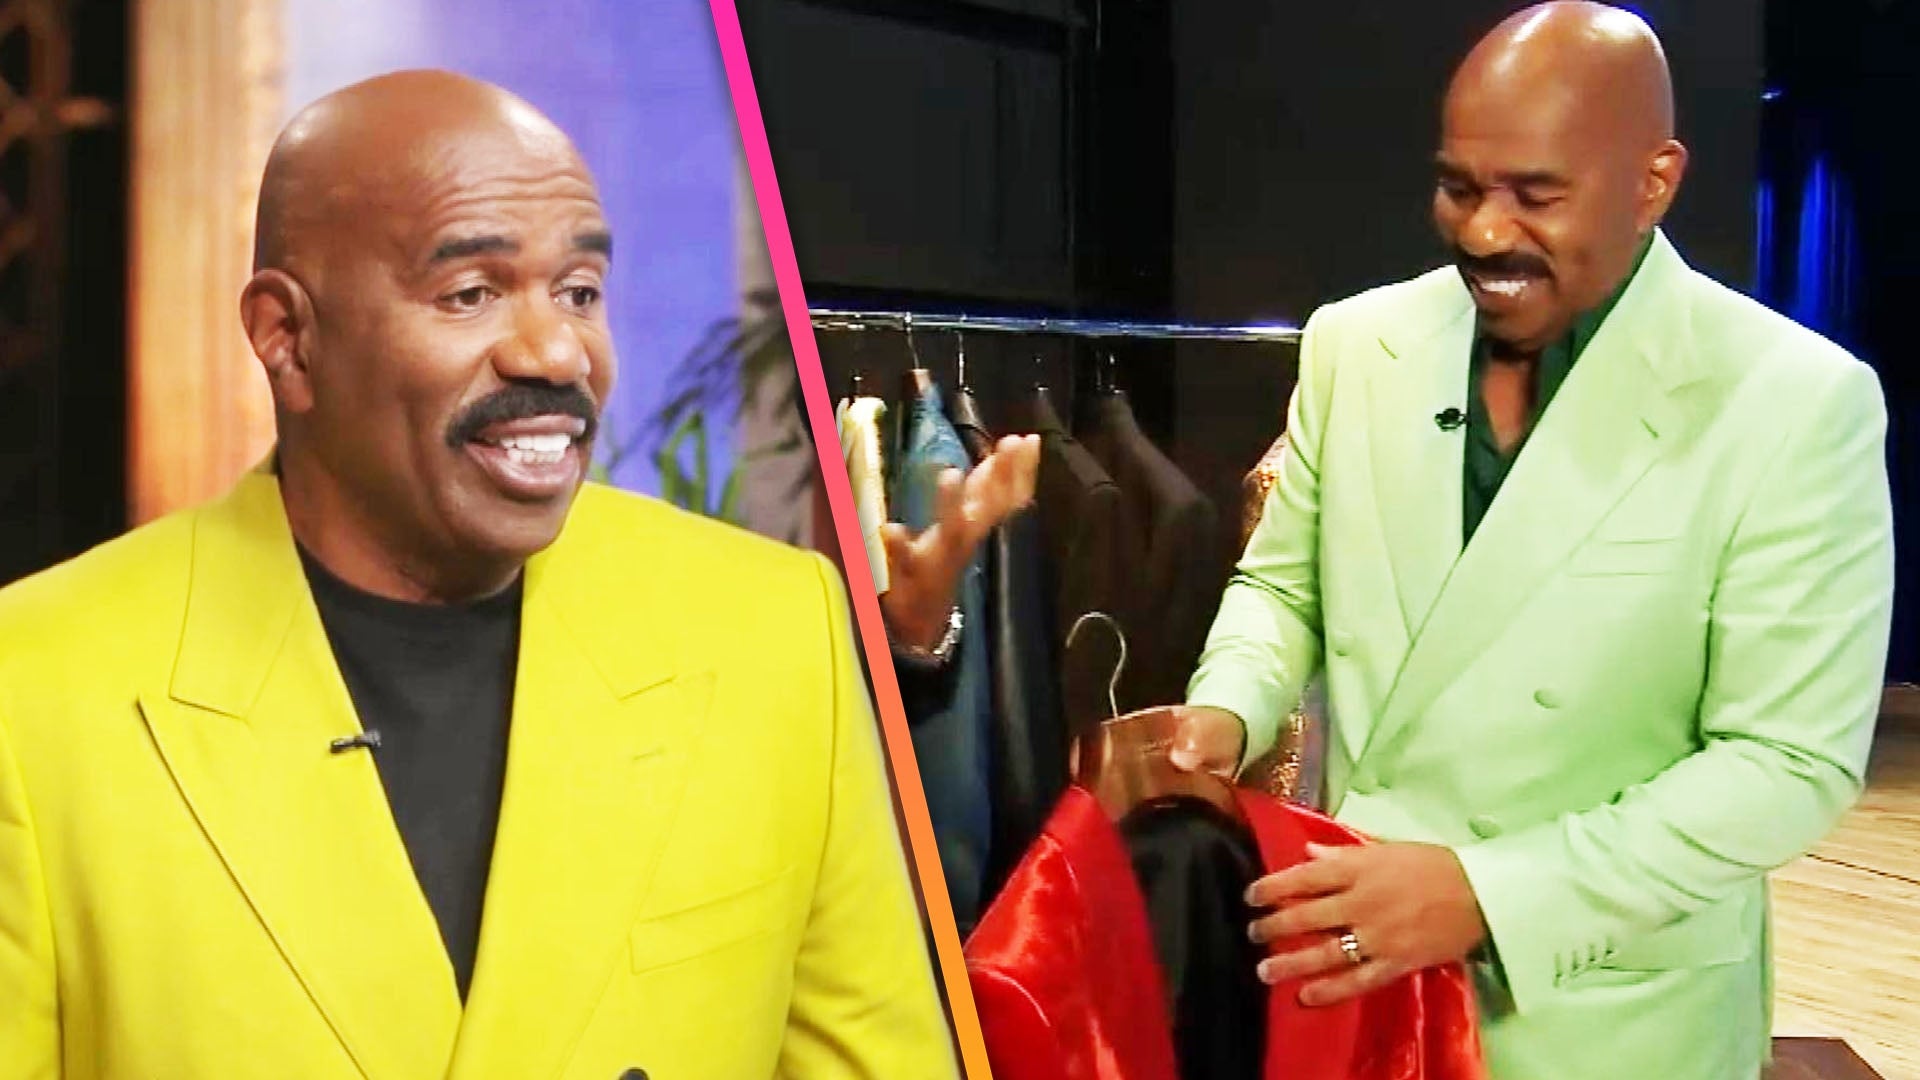 Inside Steve Harvey's fashion glow-up as he transformed from drab TV dad in  oversized suits to style icon